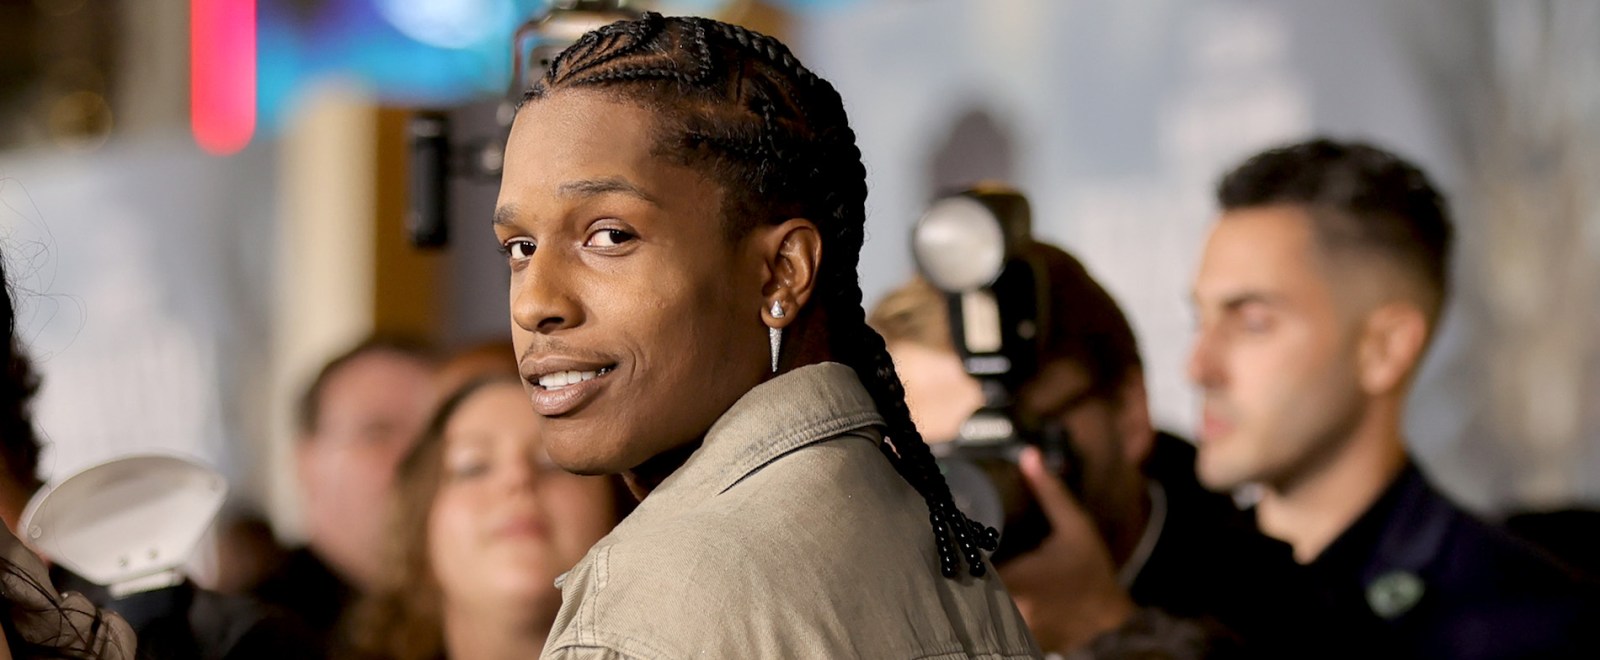 A$AP Rocky Booking Agent Info & Pricing